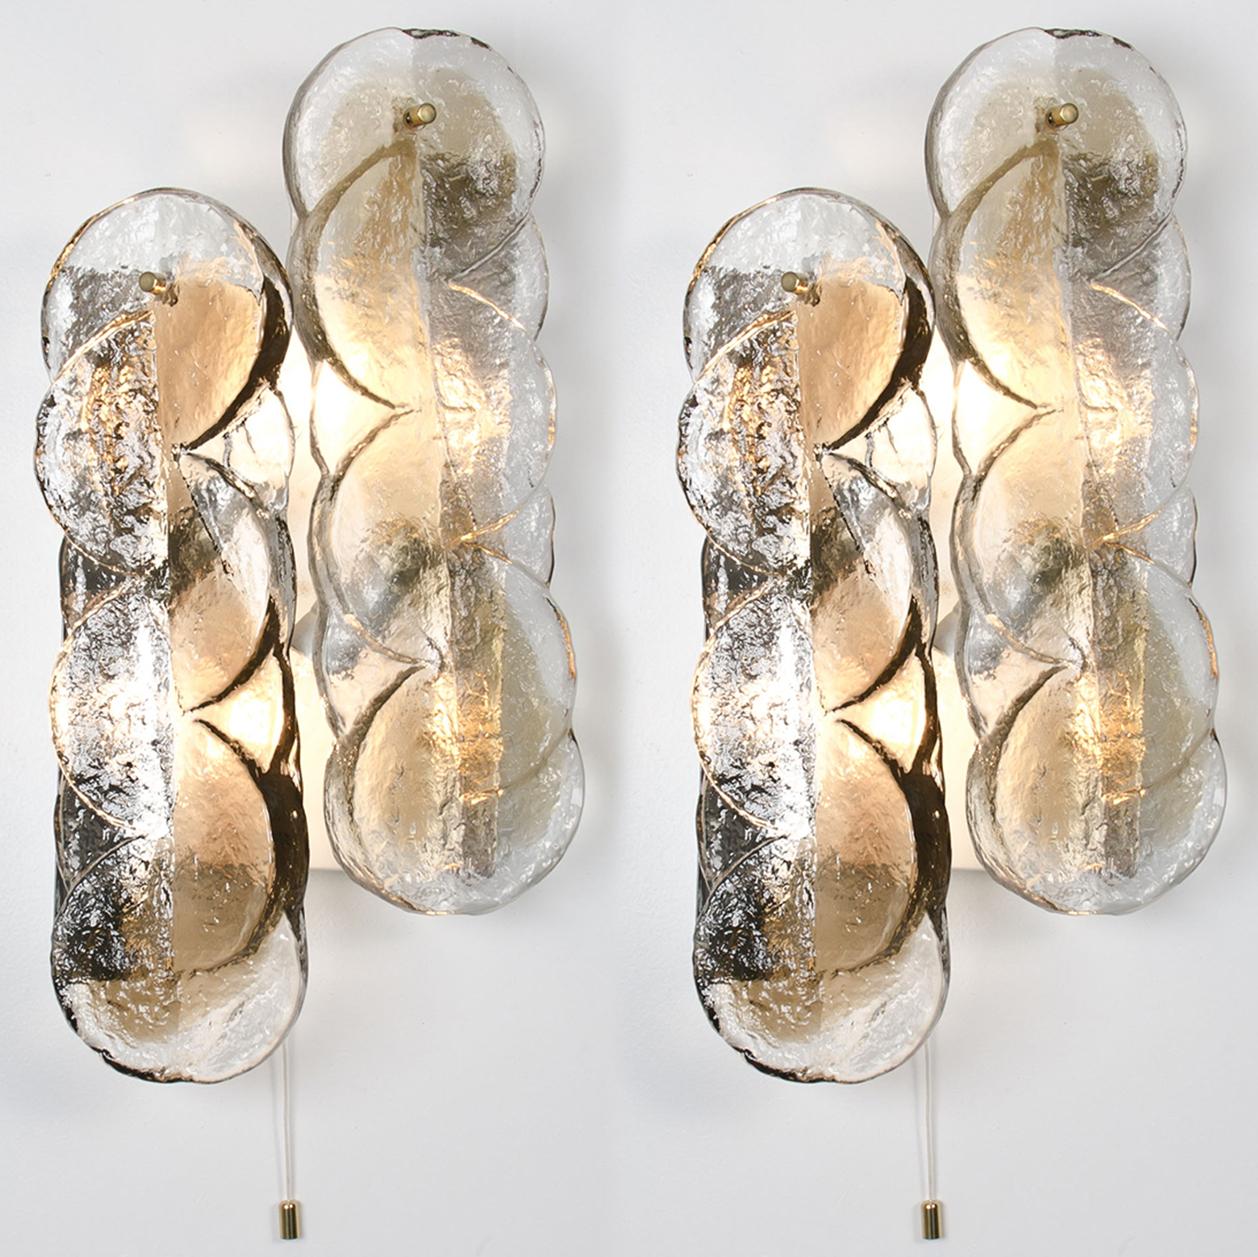 Set of high quality Murano glass light fixtures by Kalmar, 1960s. Clear twisted crystal glass panels with a light gold dish amber colored stripe in it. Illuminates beautifully.

Kalmar was the most important producer of premium-quality chandeliers